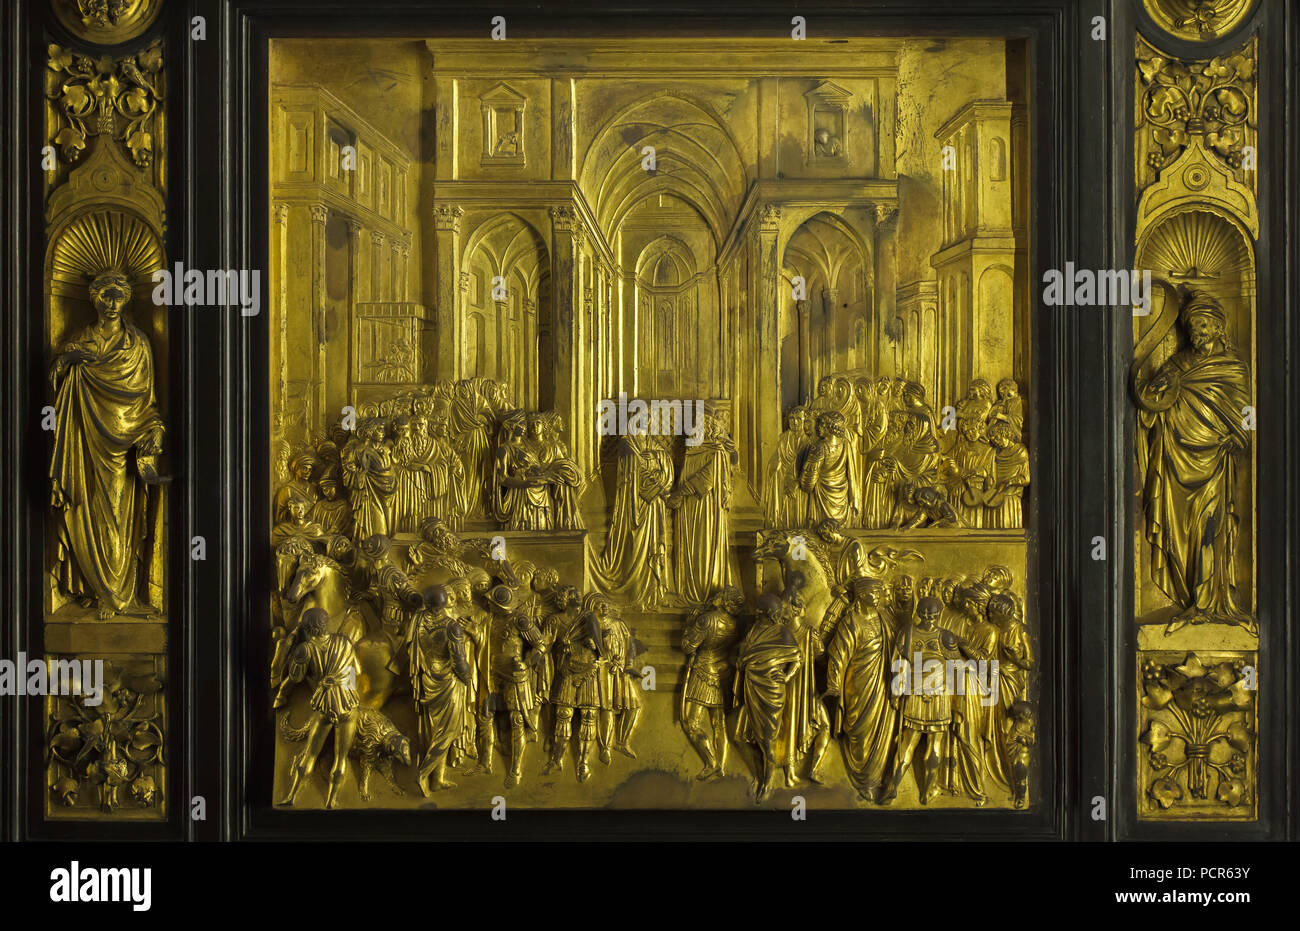 Story of King Solomon and the Queen of Sheba depicted in the gilded bronze panel from the Gates of Paradise (Porta del Paradiso) designed by Italian Early Renaissance sculptor Lorenzo Ghiberti for the Florence Baptistery (Battistero di San Giovanni), now on display in the Museo dell'Opera del Duomo (Museum of the Works of the Florence Cathedral) in Florence, Tuscany, Italy. Stock Photo